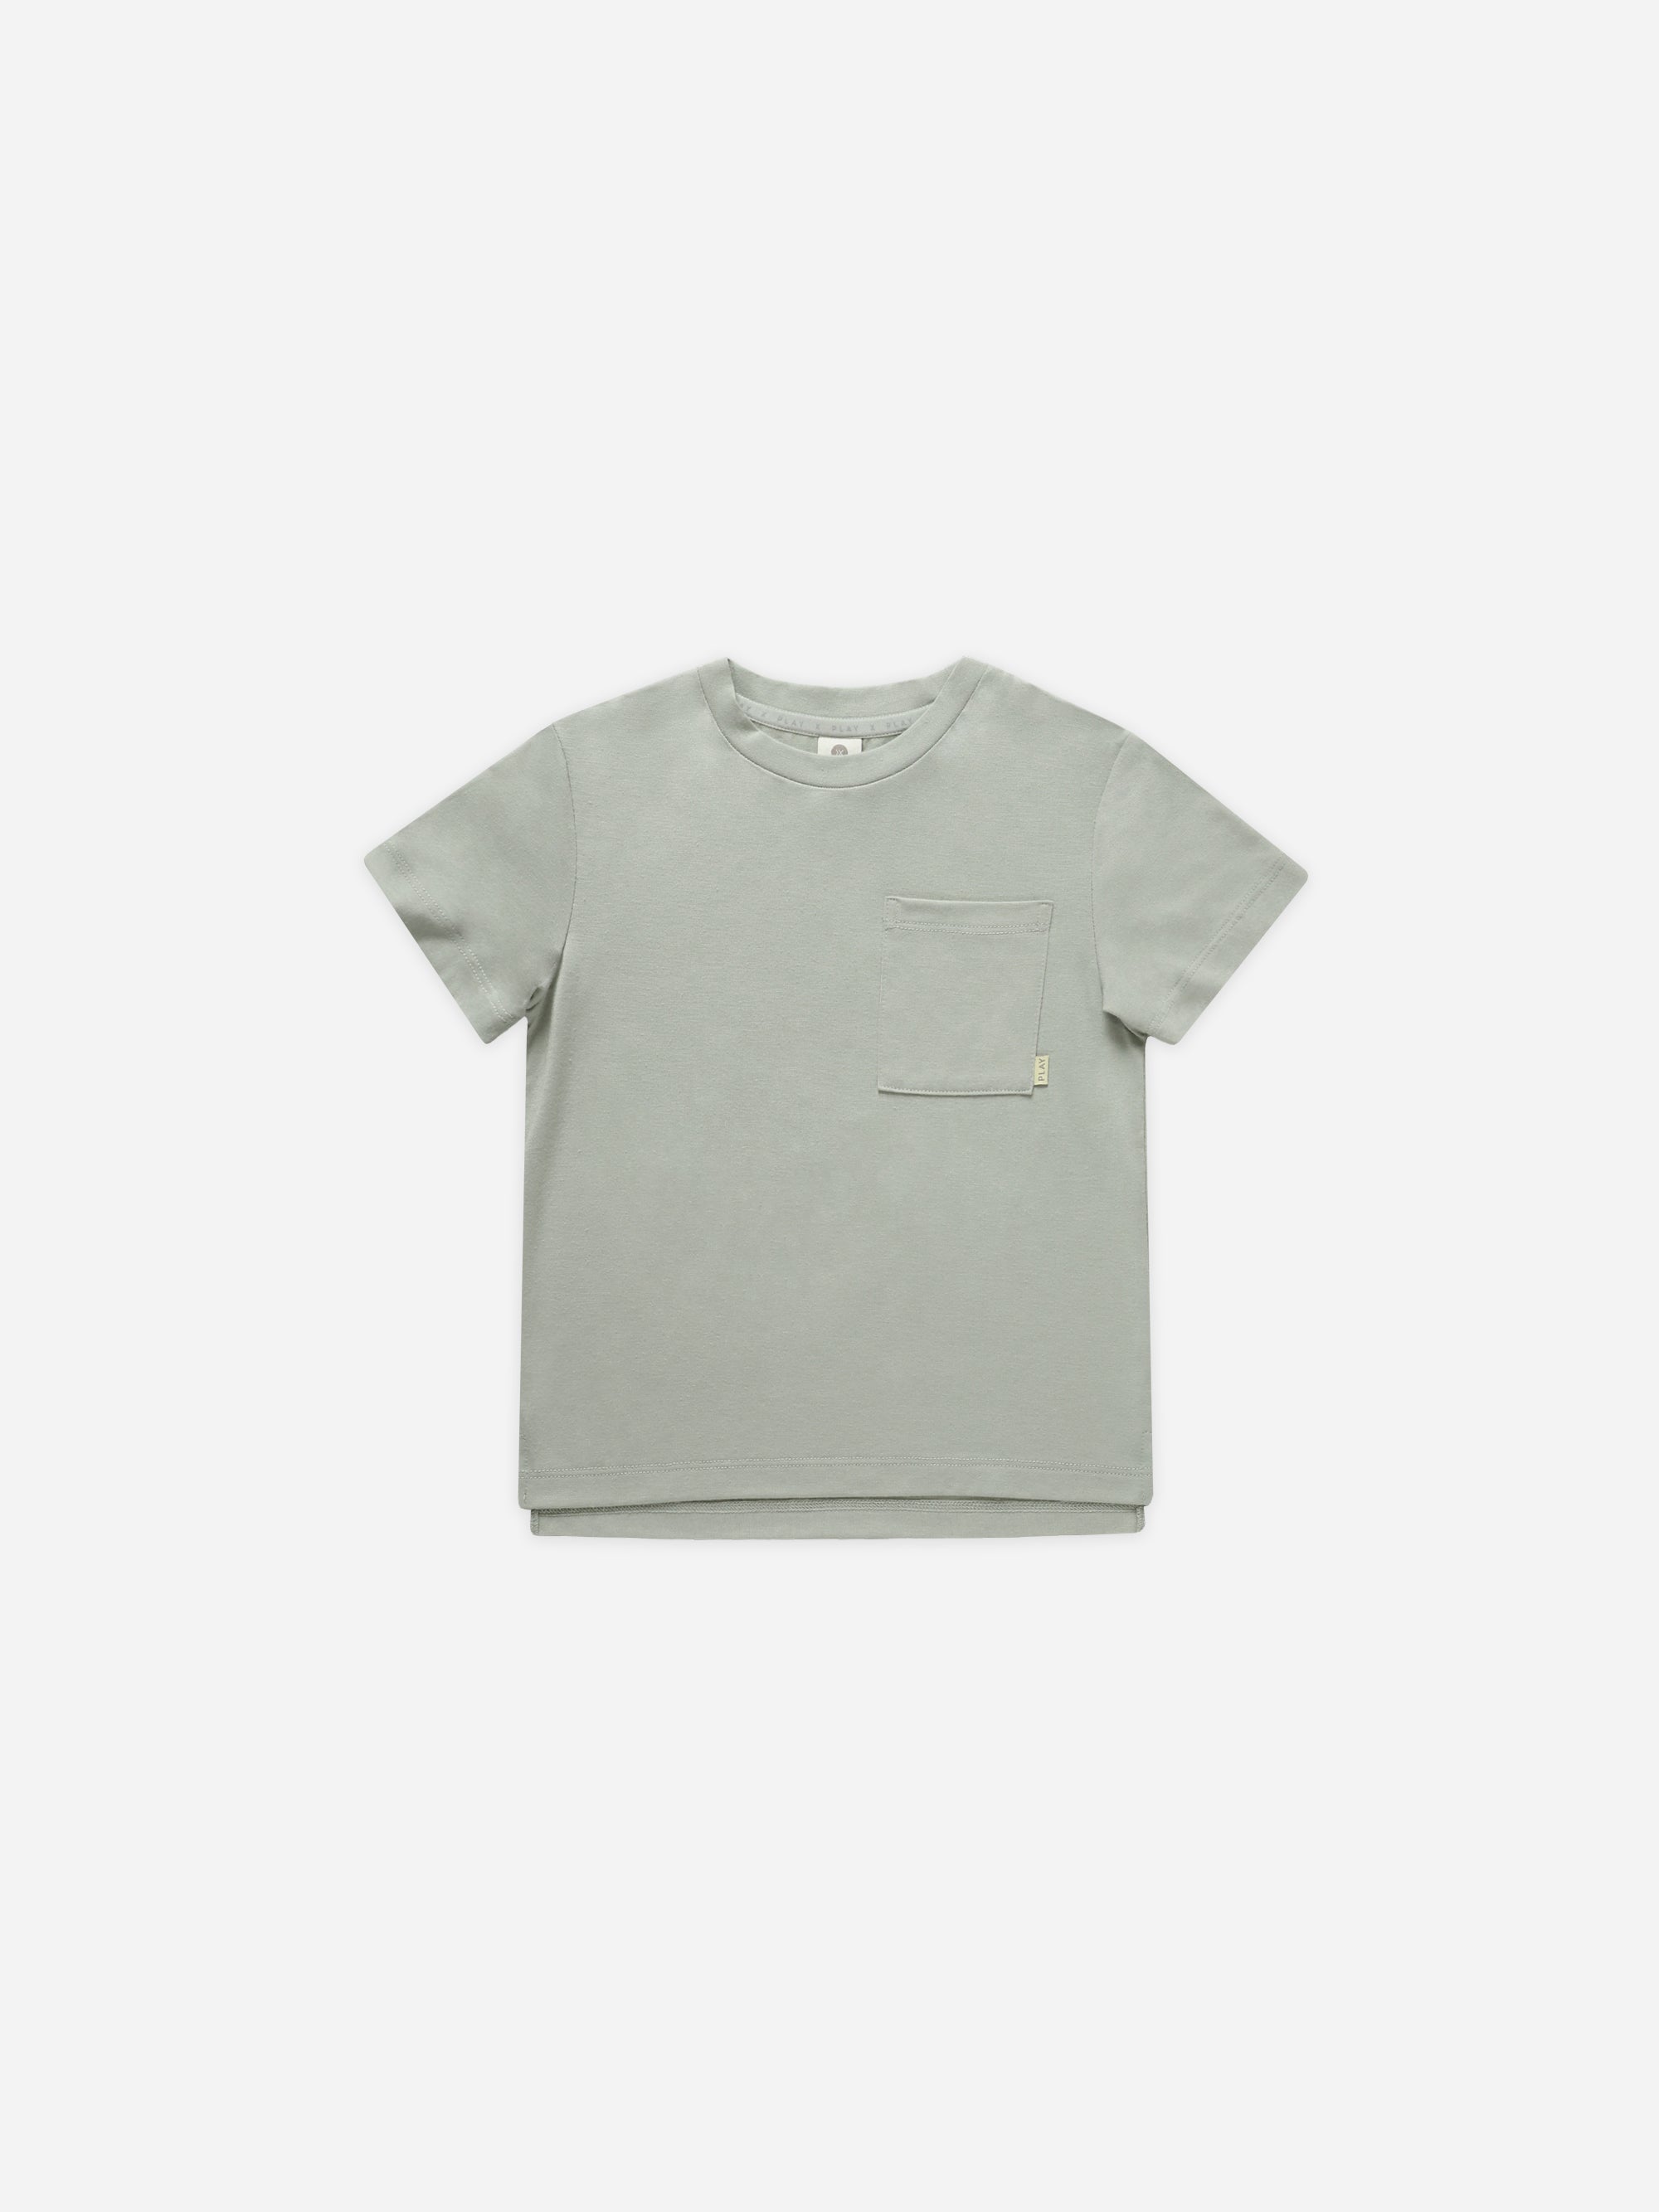 Cove Essential Pocket Tee || Seafoam - Rylee + Cru | Kids Clothes | Trendy Baby Clothes | Modern Infant Outfits |